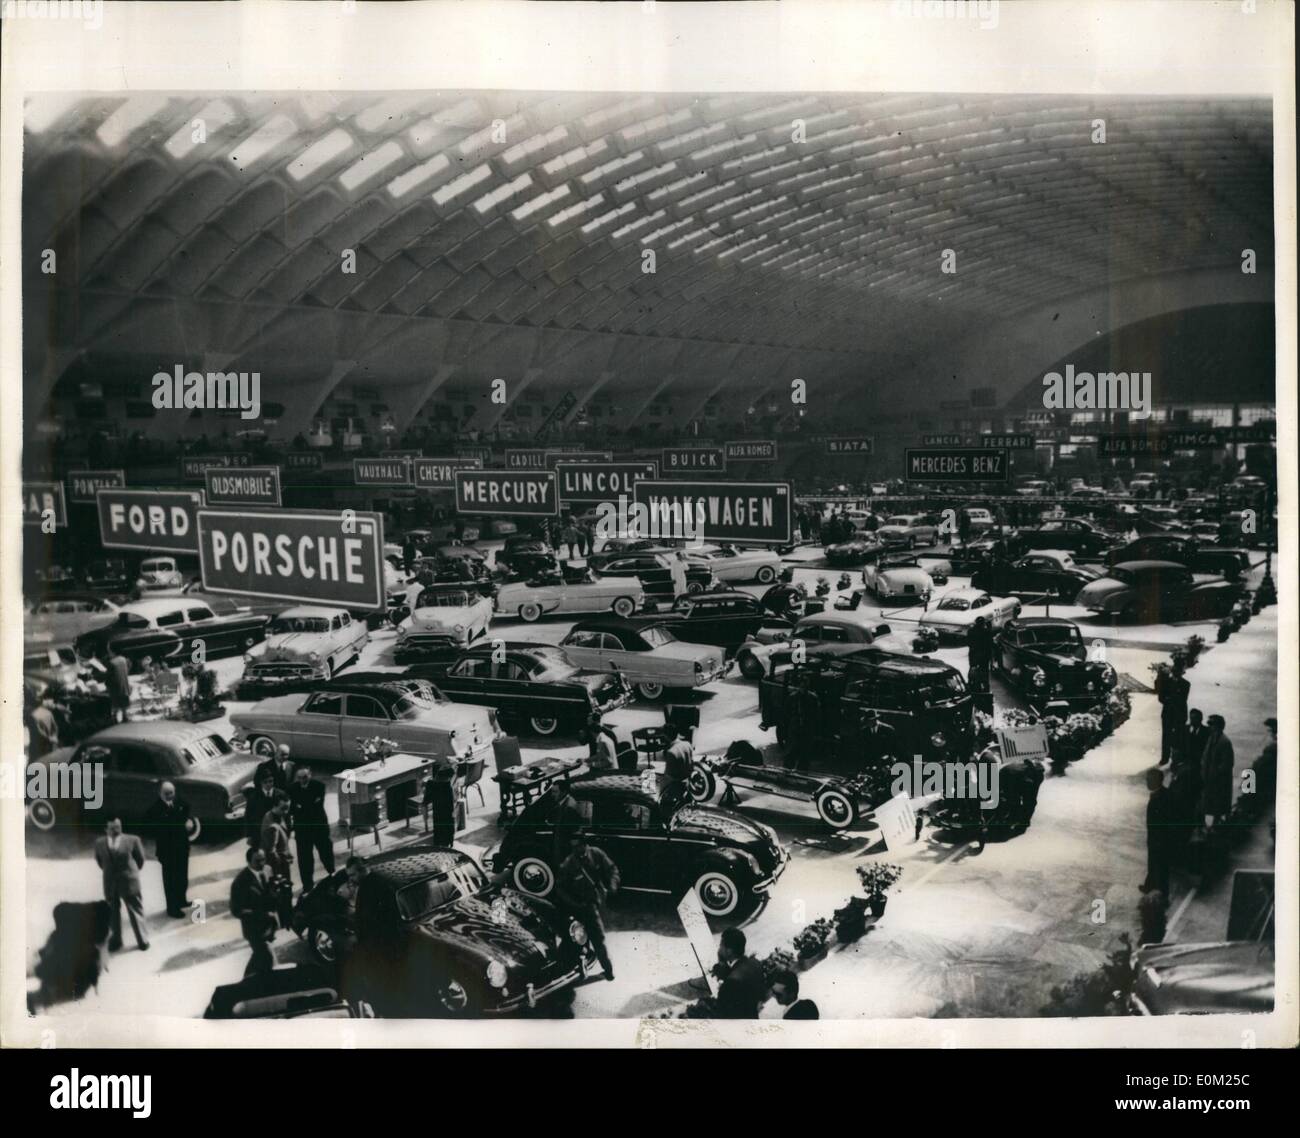 Apr. 04, 1953 - International Motor show at Turin: Photo shows General view of the Motor Show which opened recently at Turin, Italy. Many foreign and Italian cars were exhibited. Stock Photo